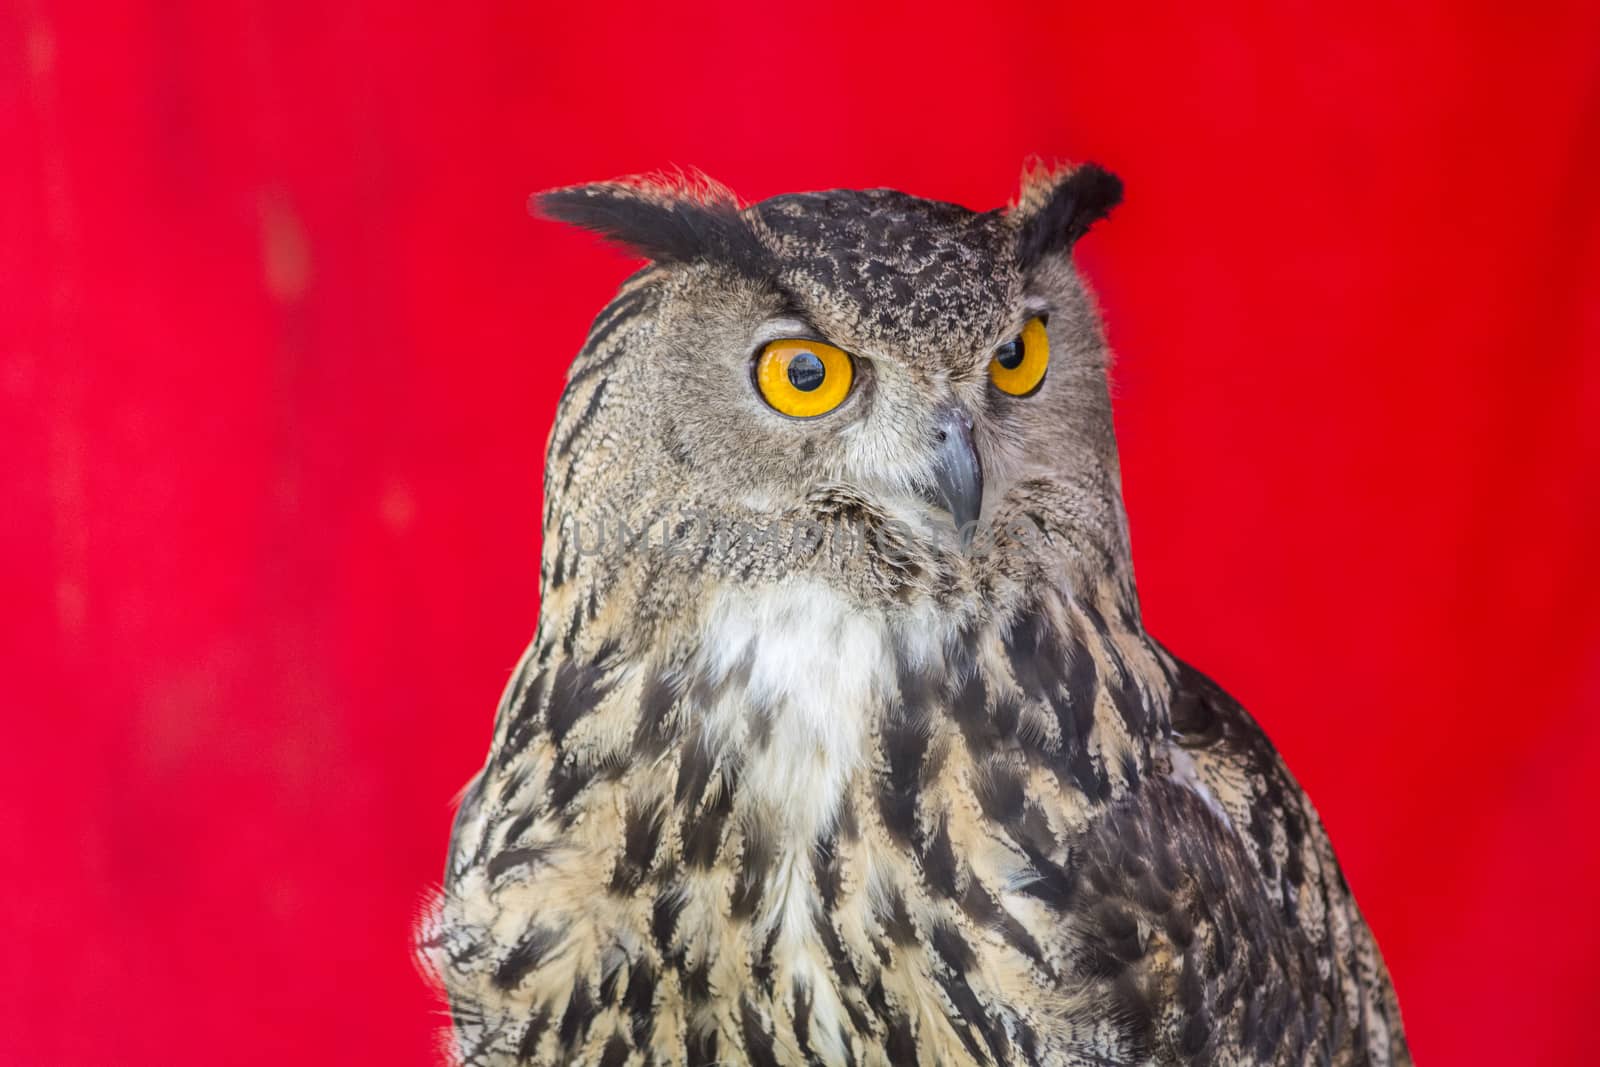 The Eurasian eagle-owl (Bubo bubo), species of eagle-owl resident in much of Eurasia